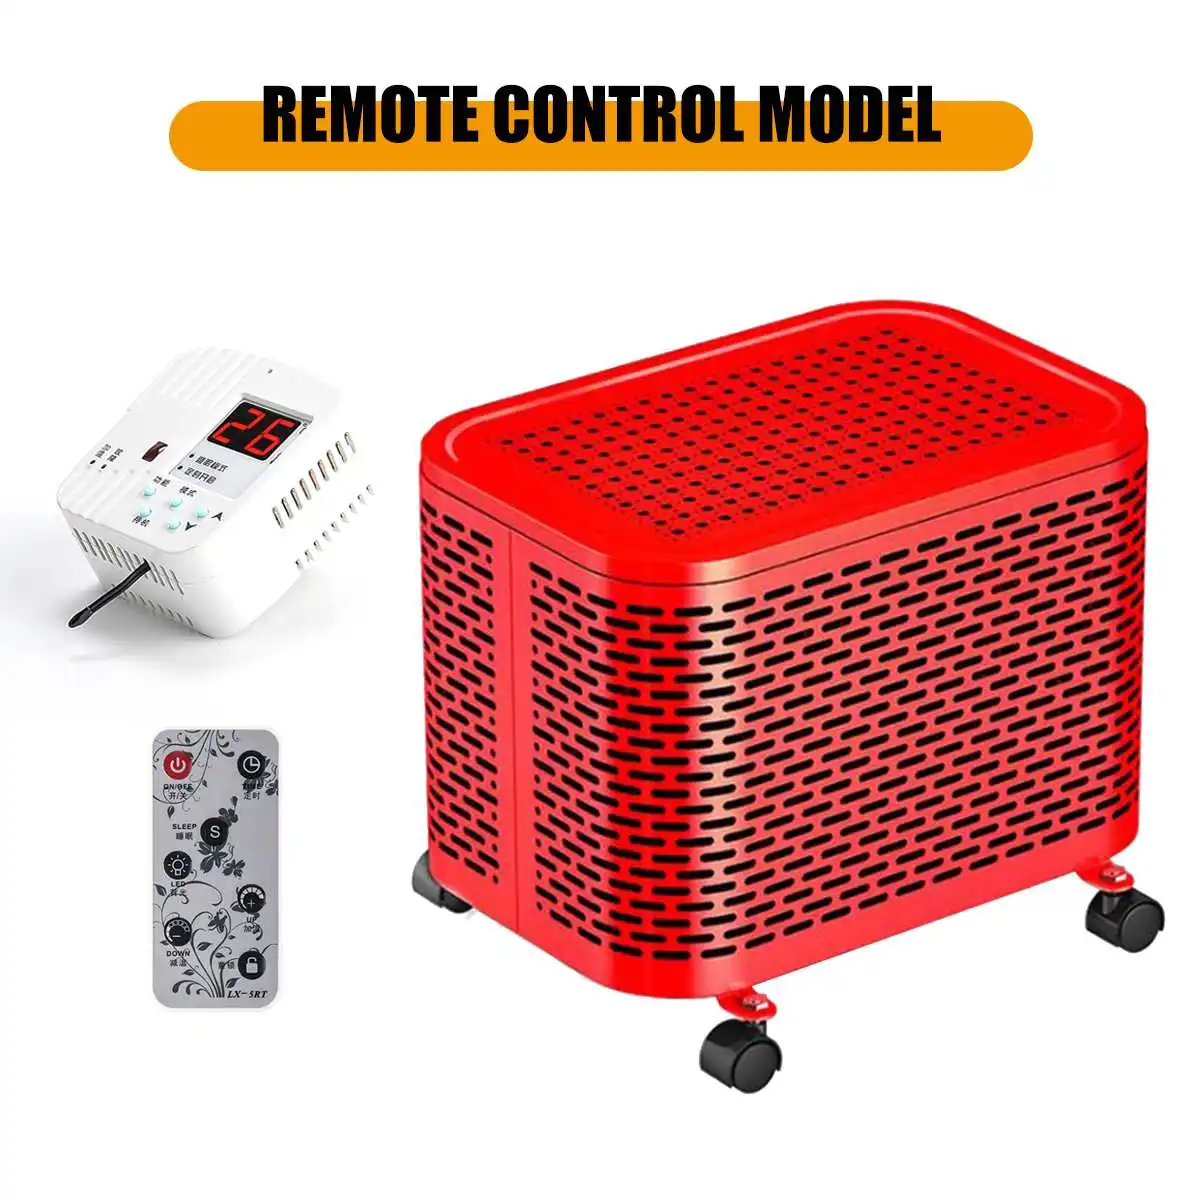 

220V 2000W Remote Control Air Heater Electric Heater Warm Air Handy Blower Room Fan Radiator Warmer For Office Home Hotel